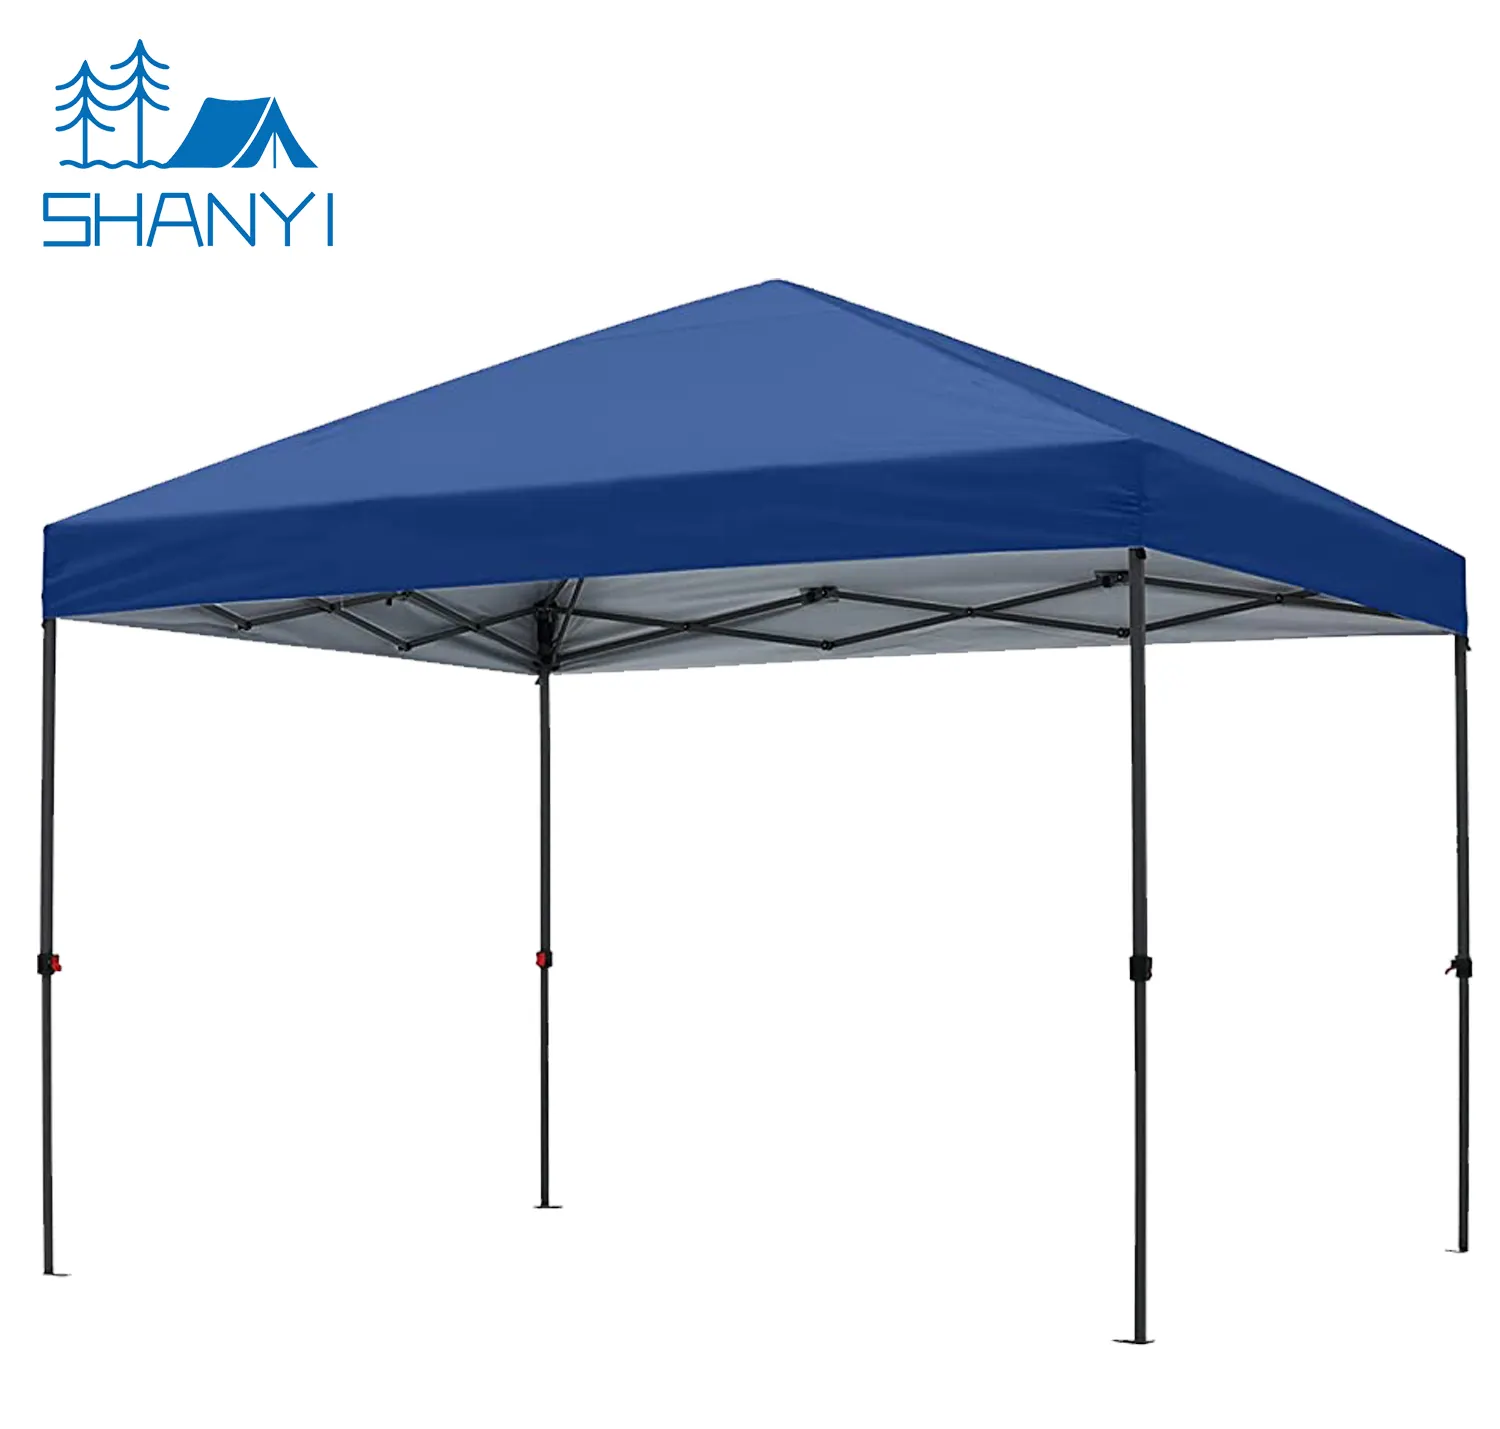 Good quality folding outdoor steel gazebo oxford fabric canopy tent outdoor